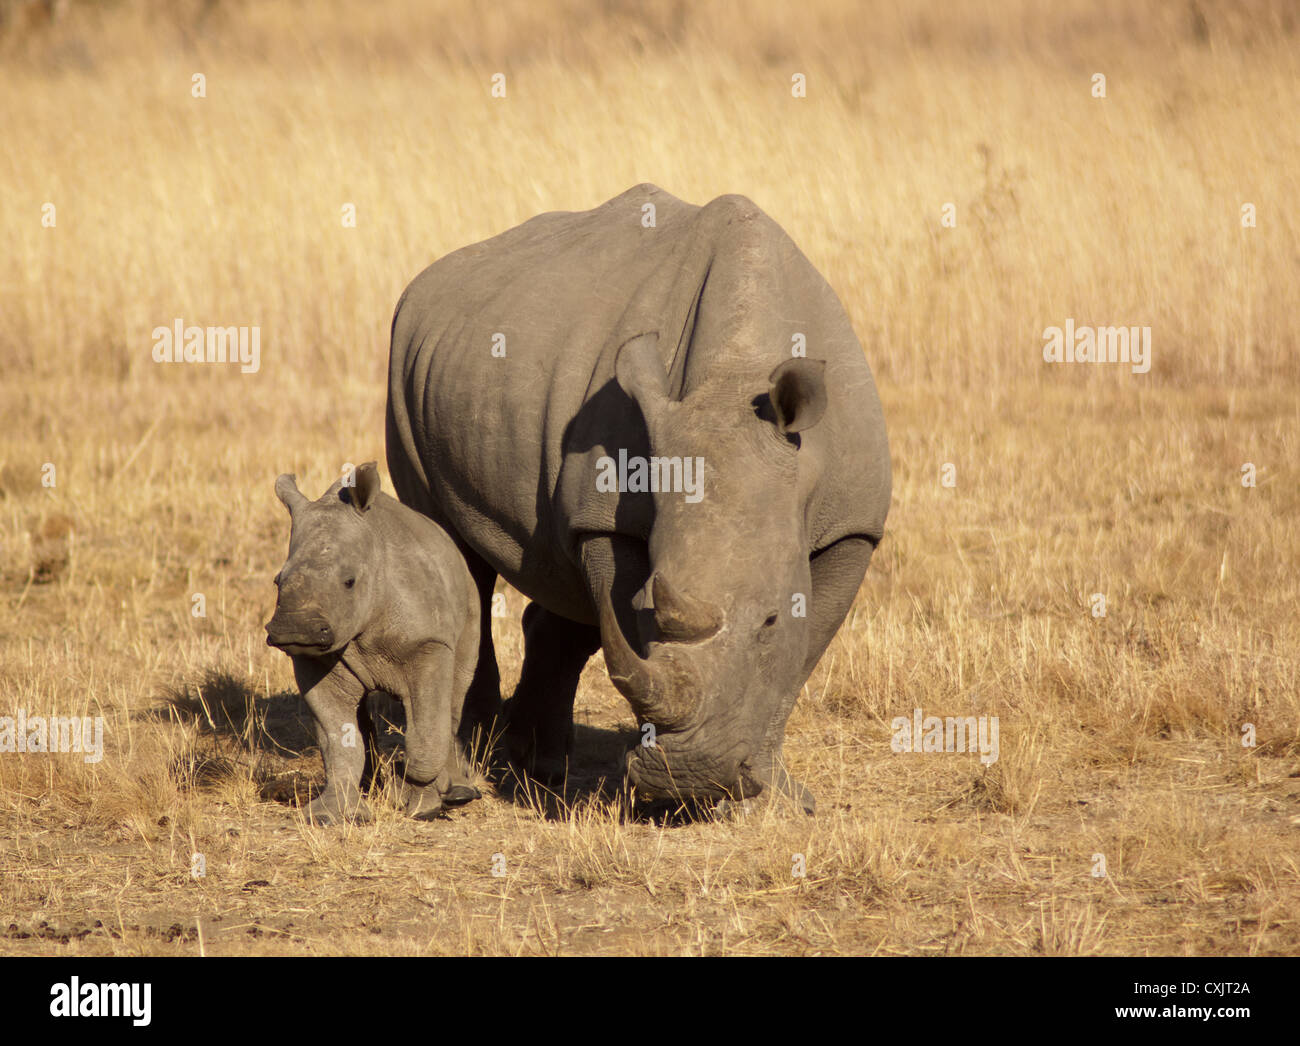 A black rhino (Diceros bicornis) and her baby calf in yellow African grassland. Stock Photo